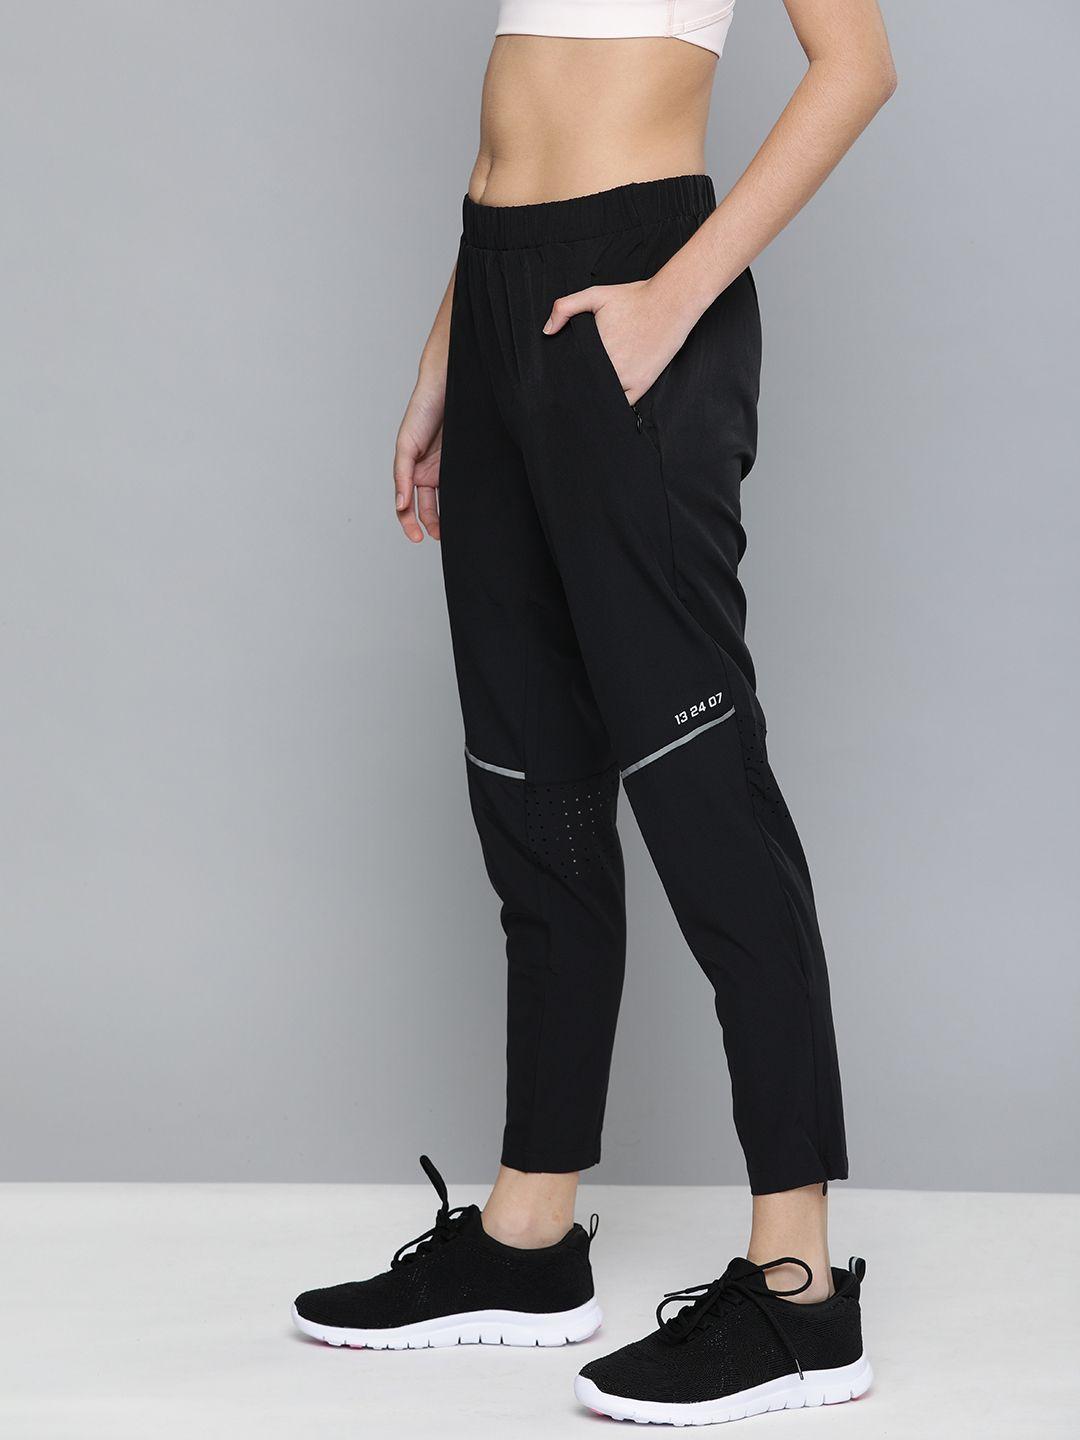 hrx-by-hrithik-roshan-women-black-solid-rapid-dry-antimicrobial-training-track-pants